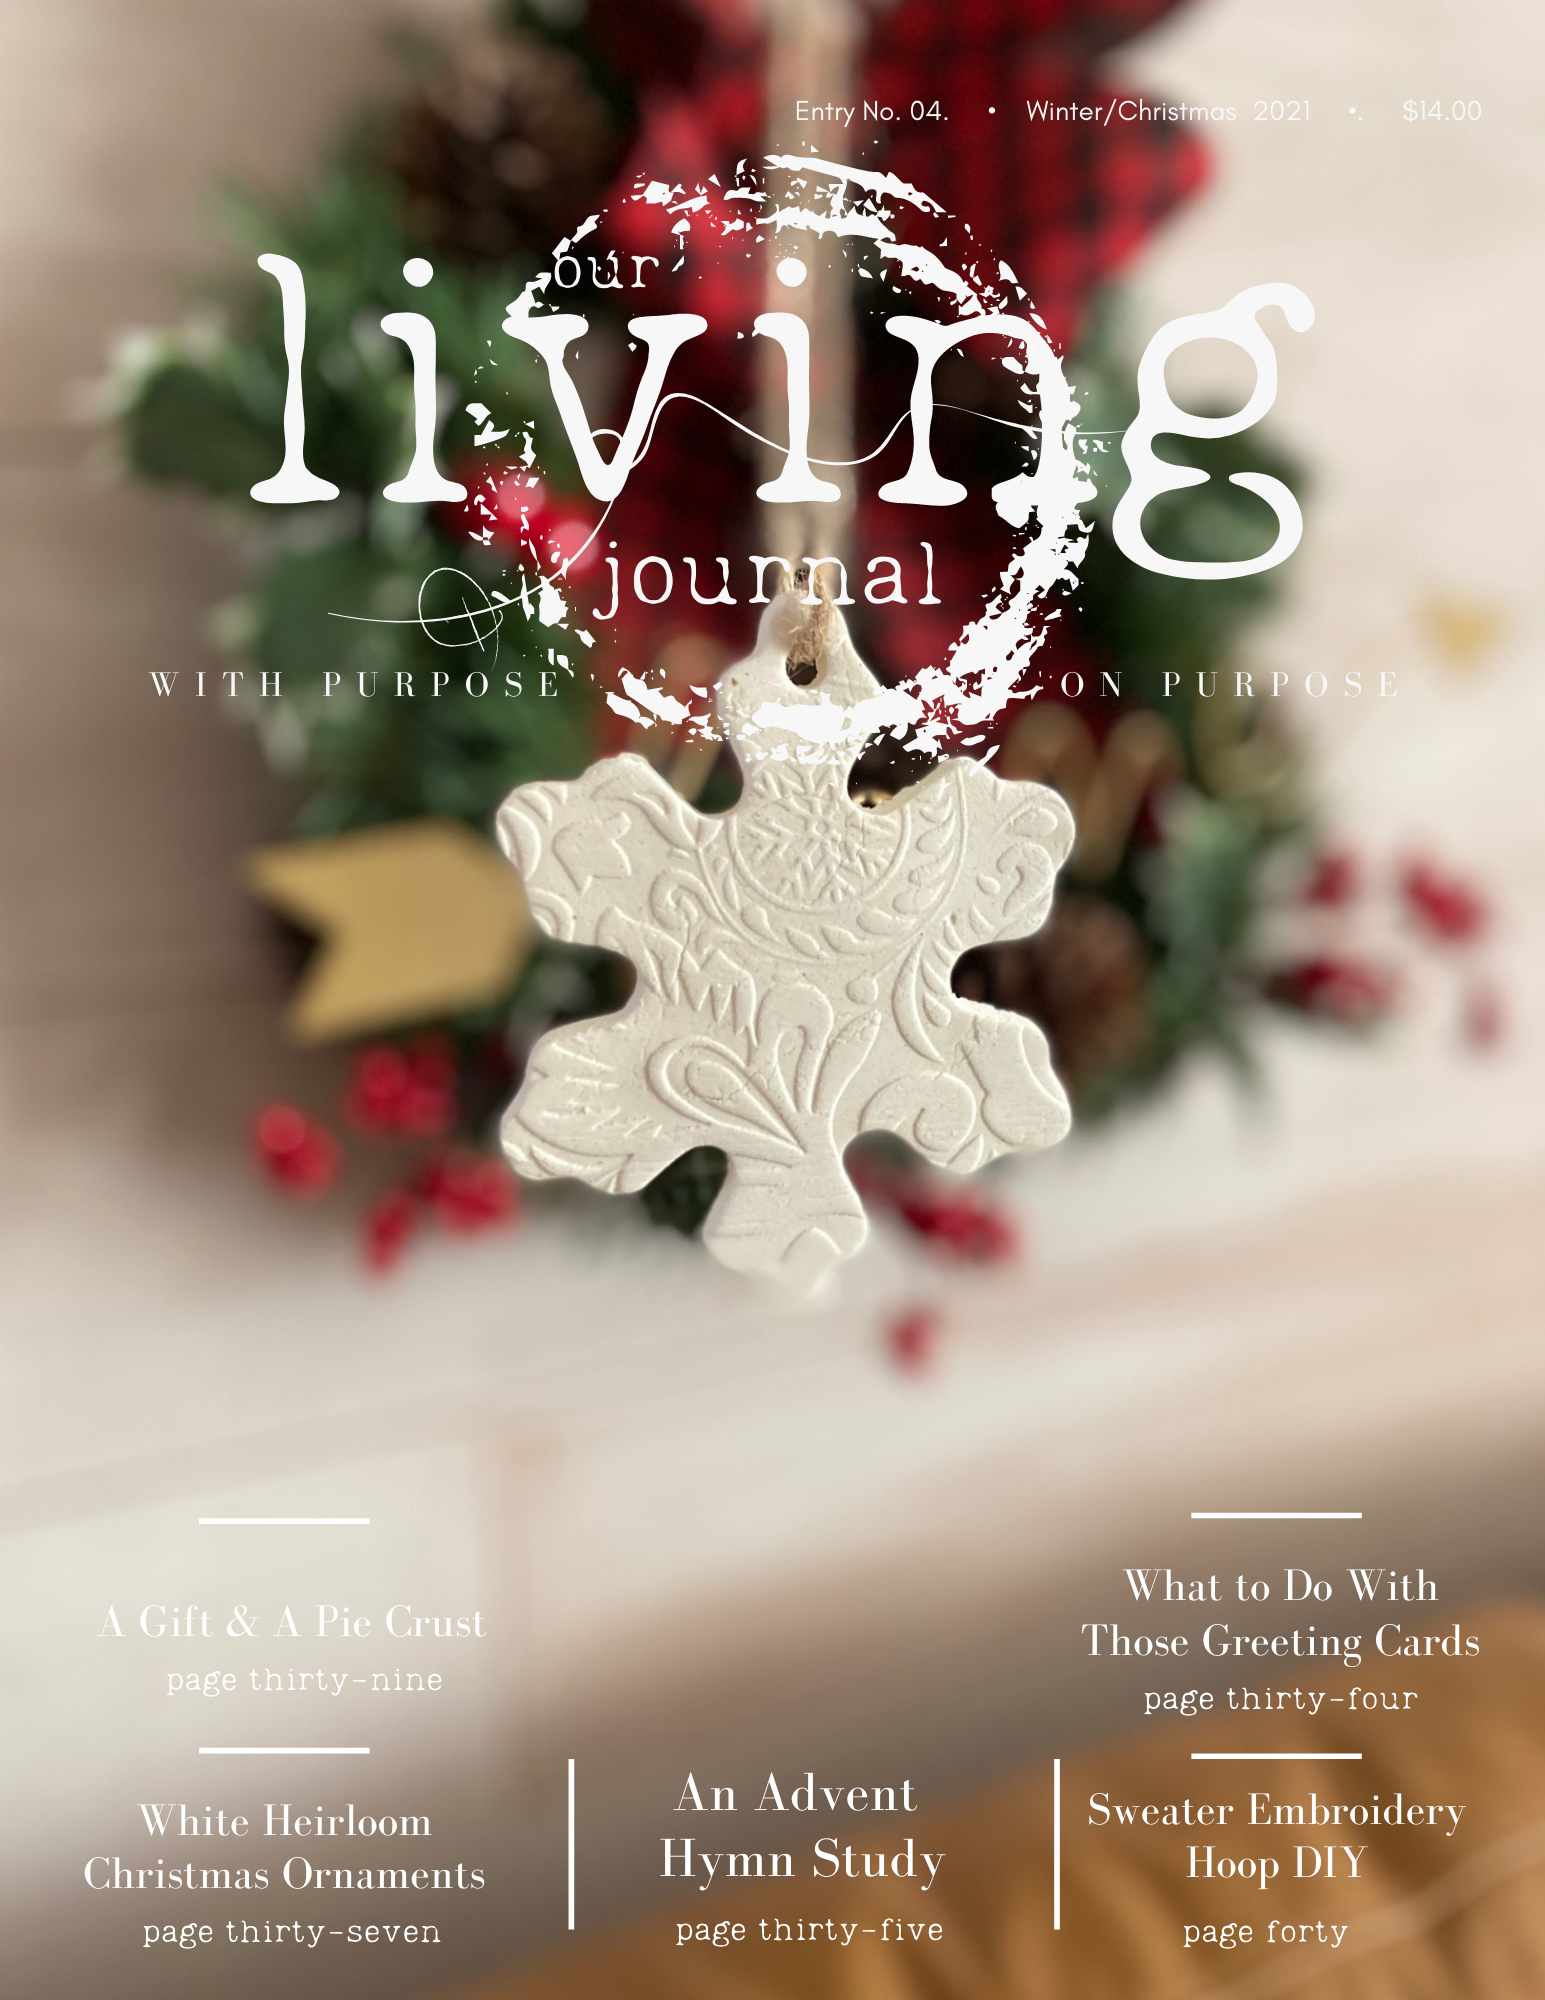 Our Living Journal Entry No. 04 Winter|Christmas